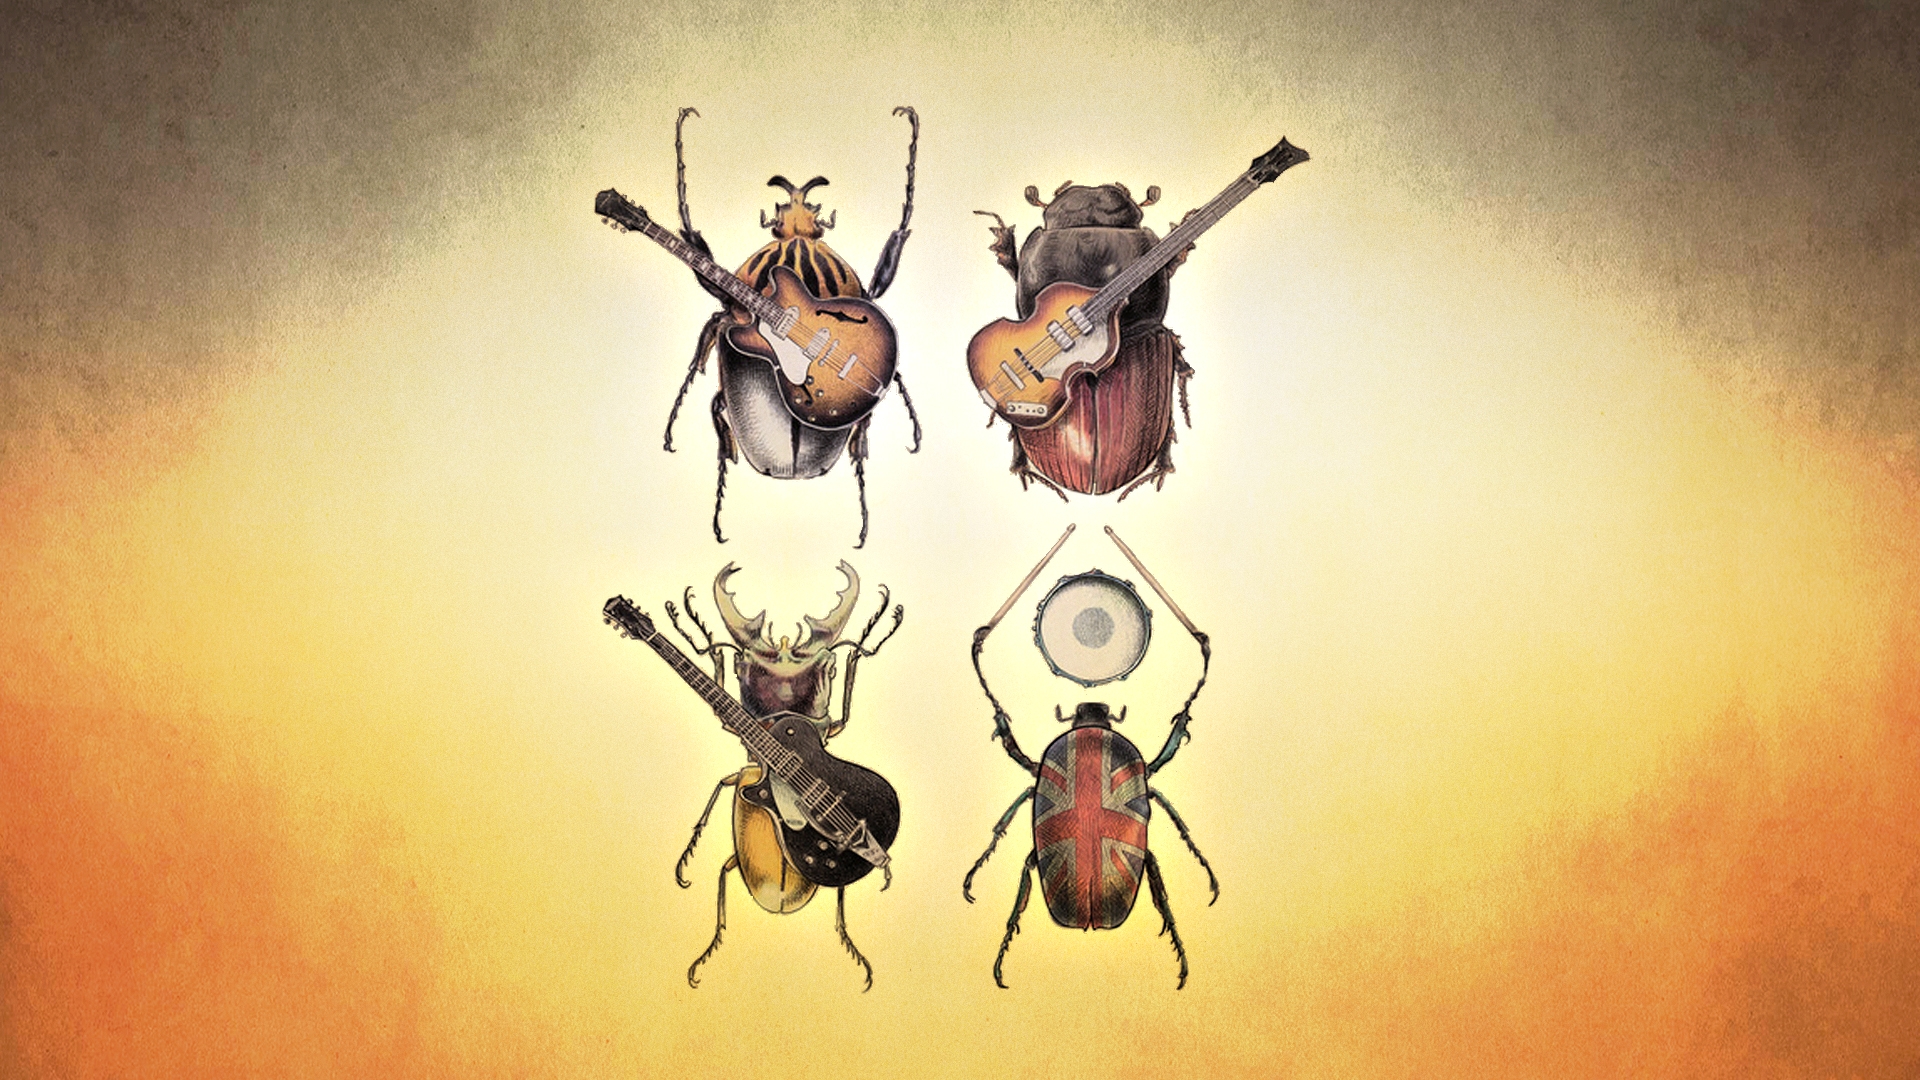 The Beatles Beetle insects guitar bands groups Wallpaper